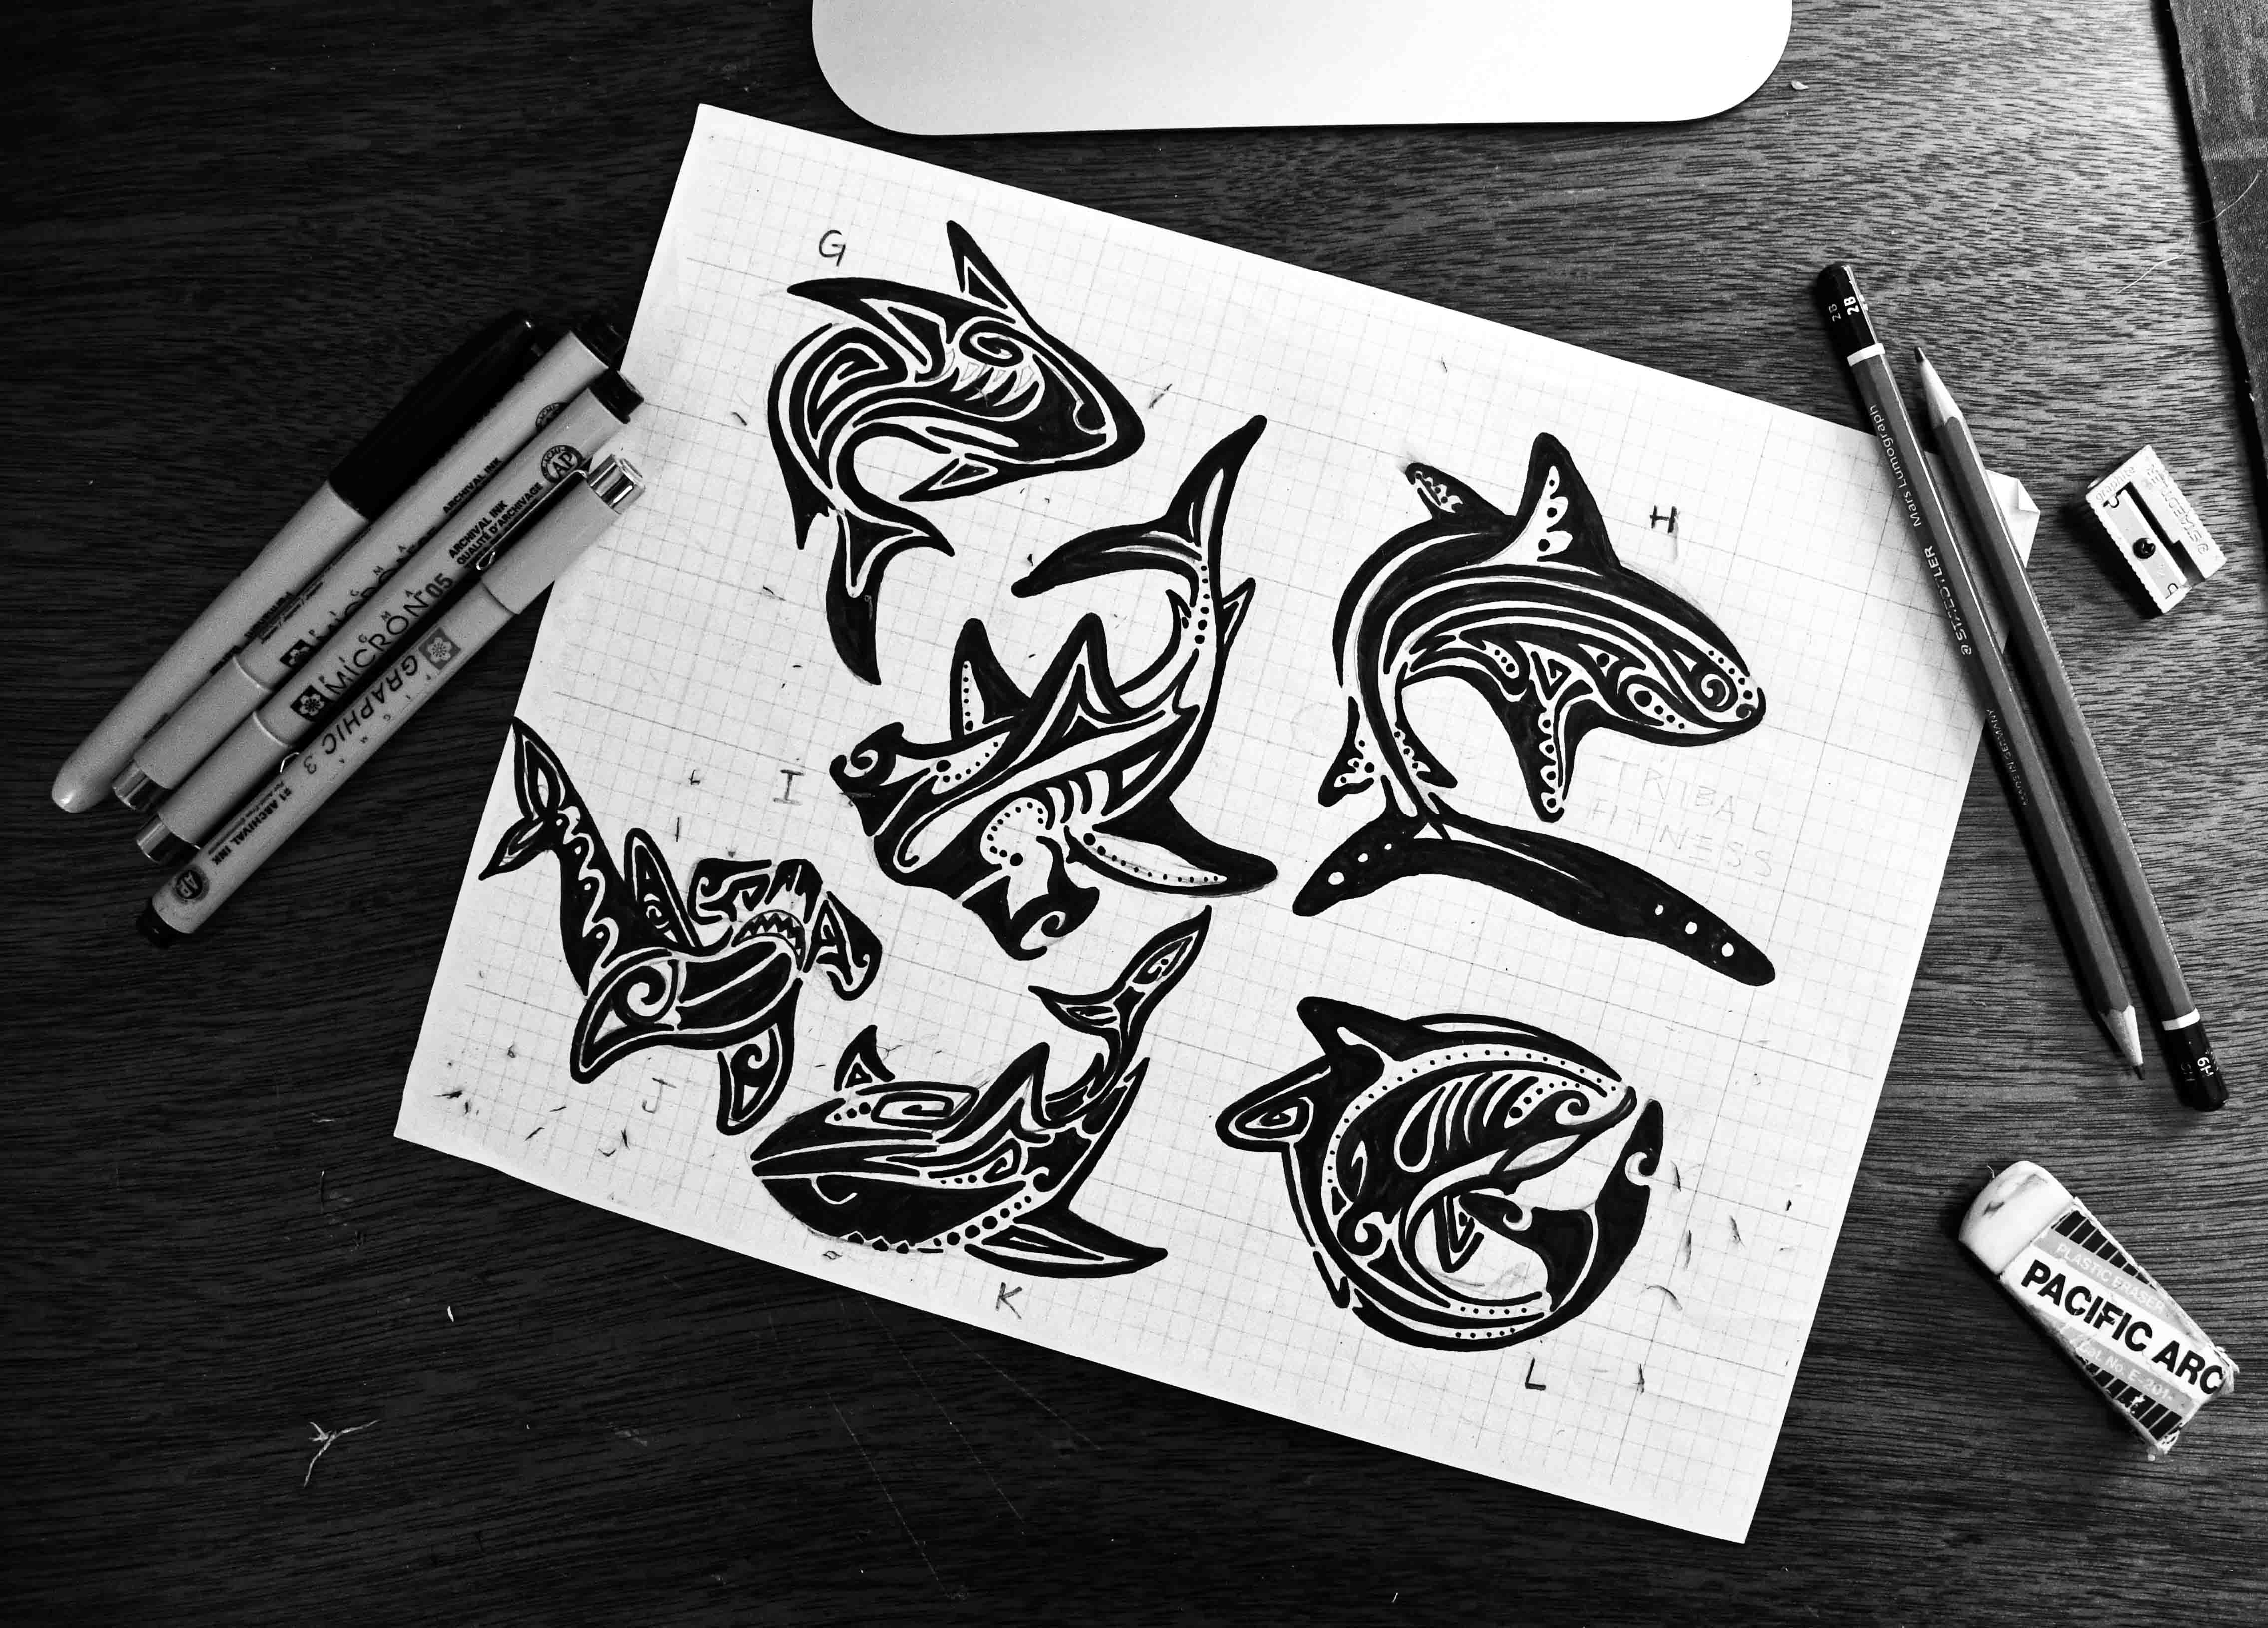 Tribal Fitness logo sketches